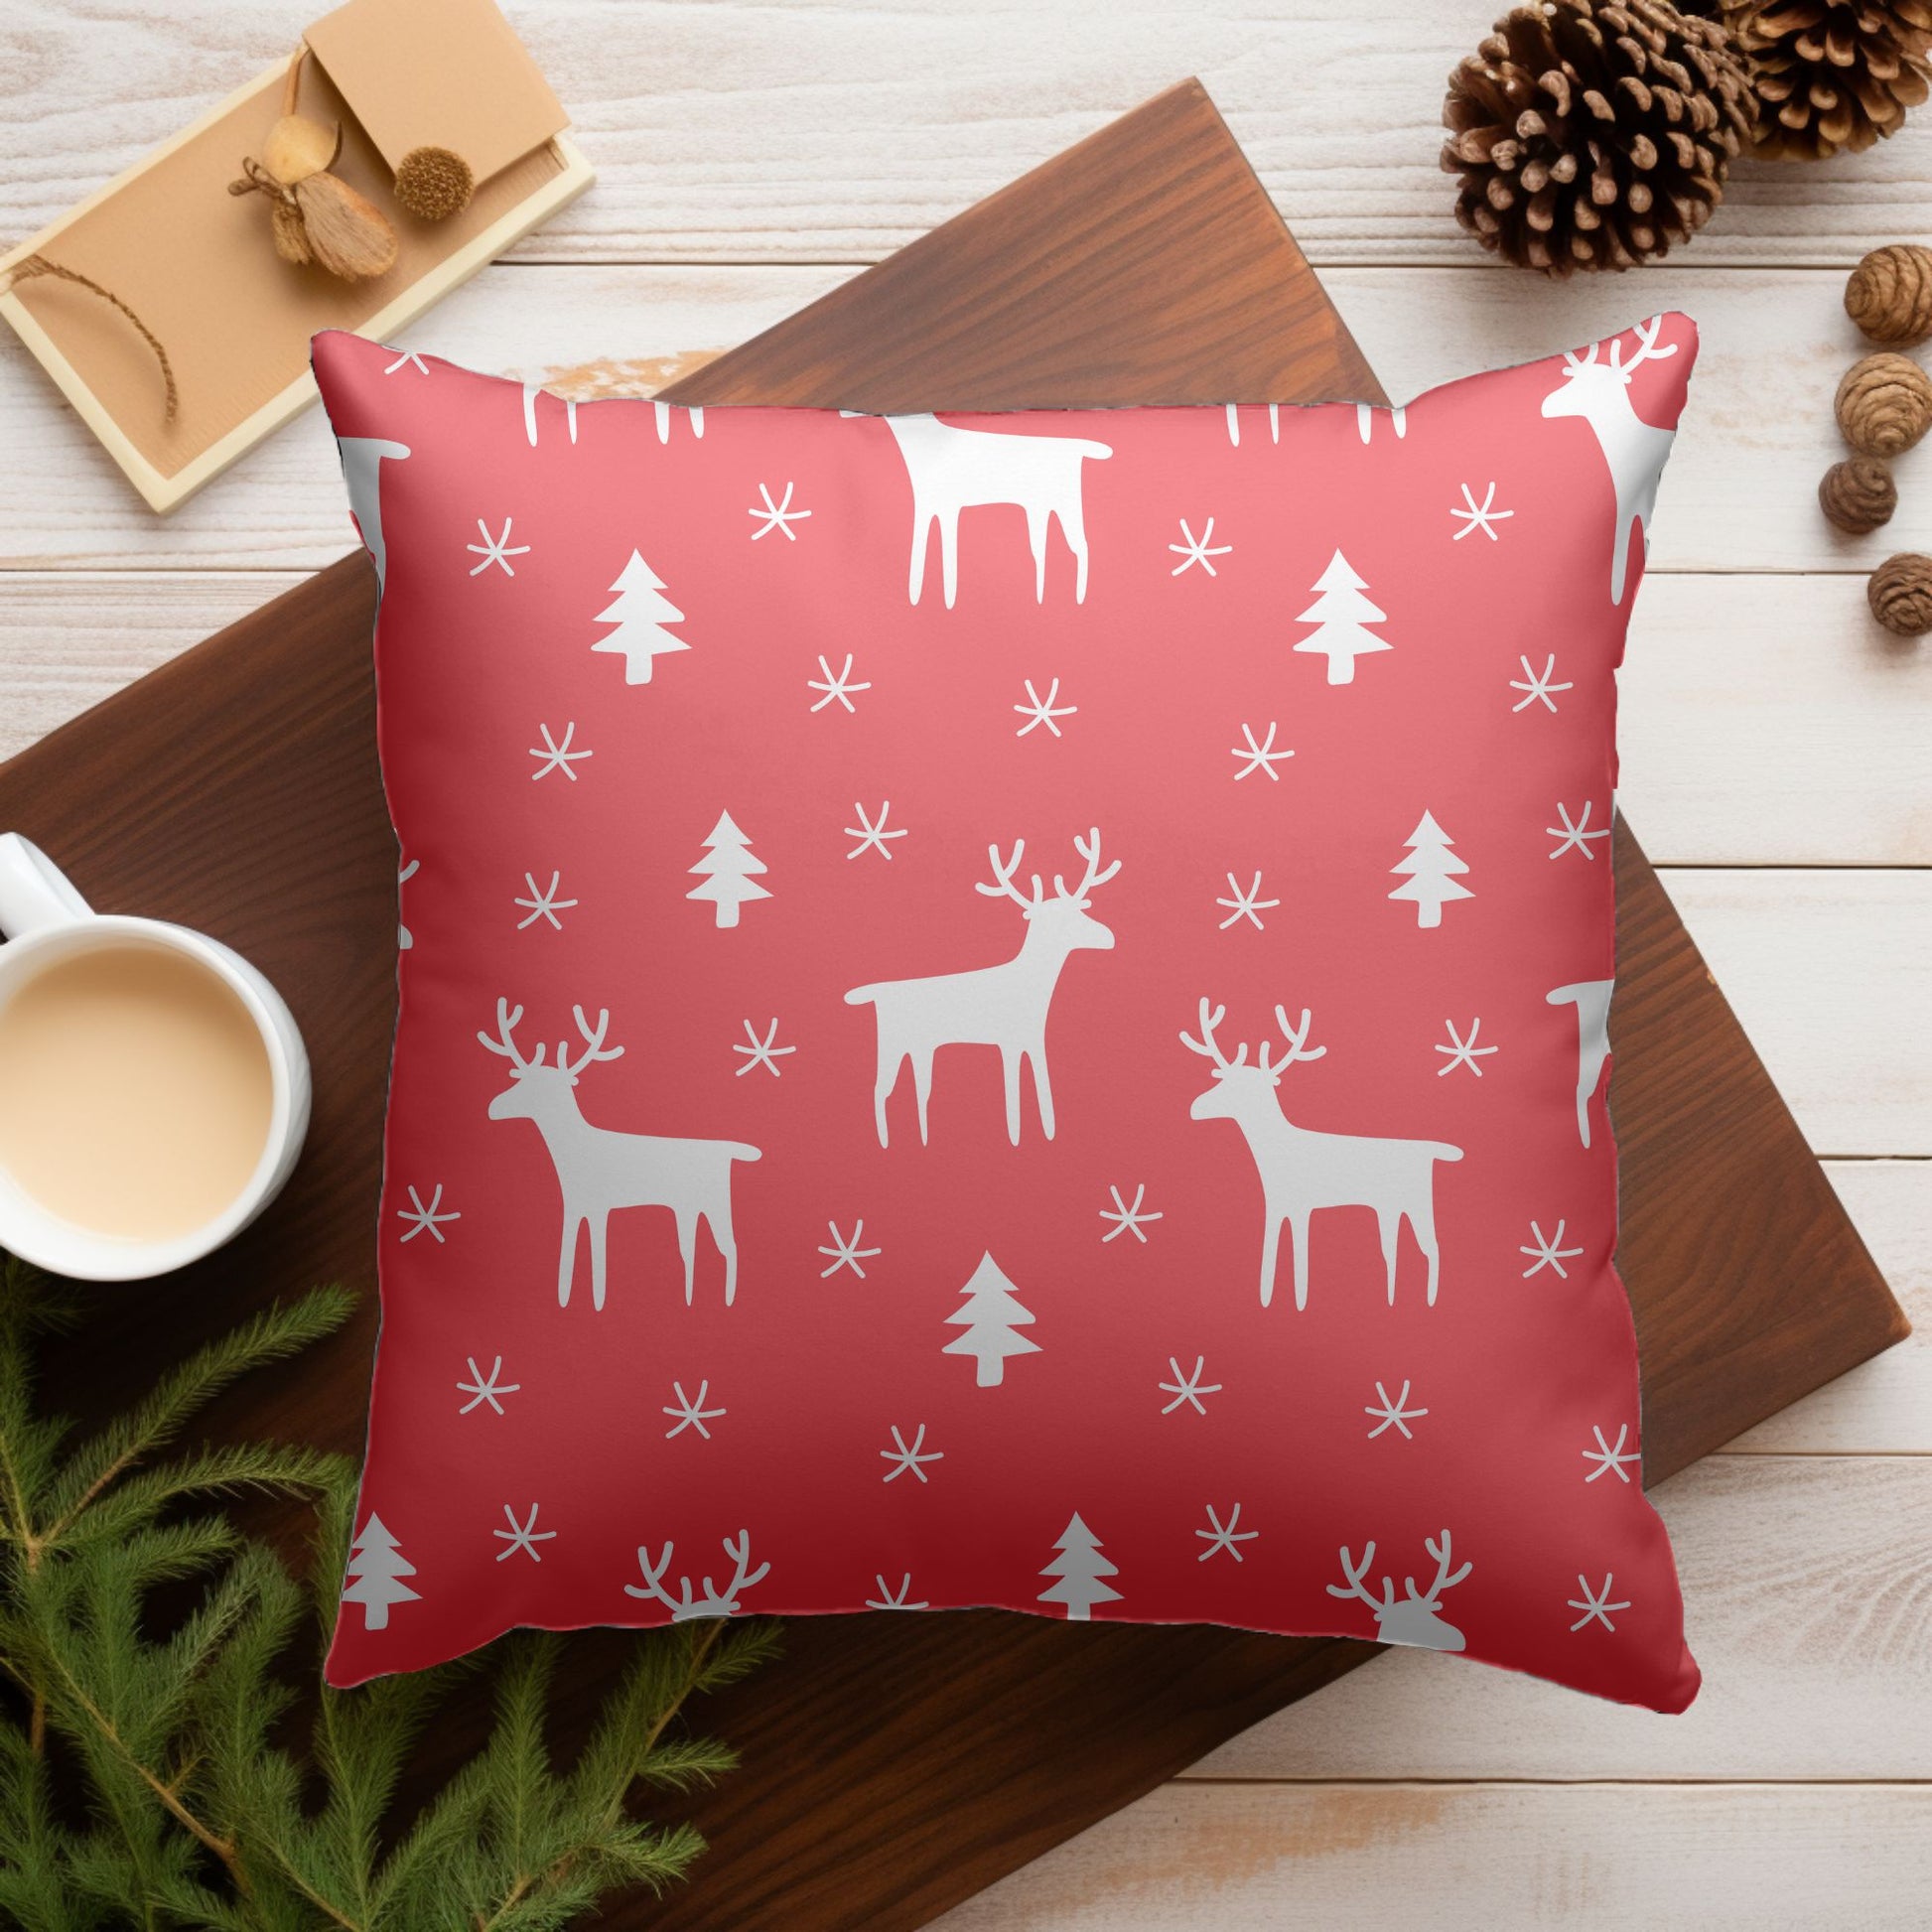 Cozy Living Room Decor with Red Christmas Pillow